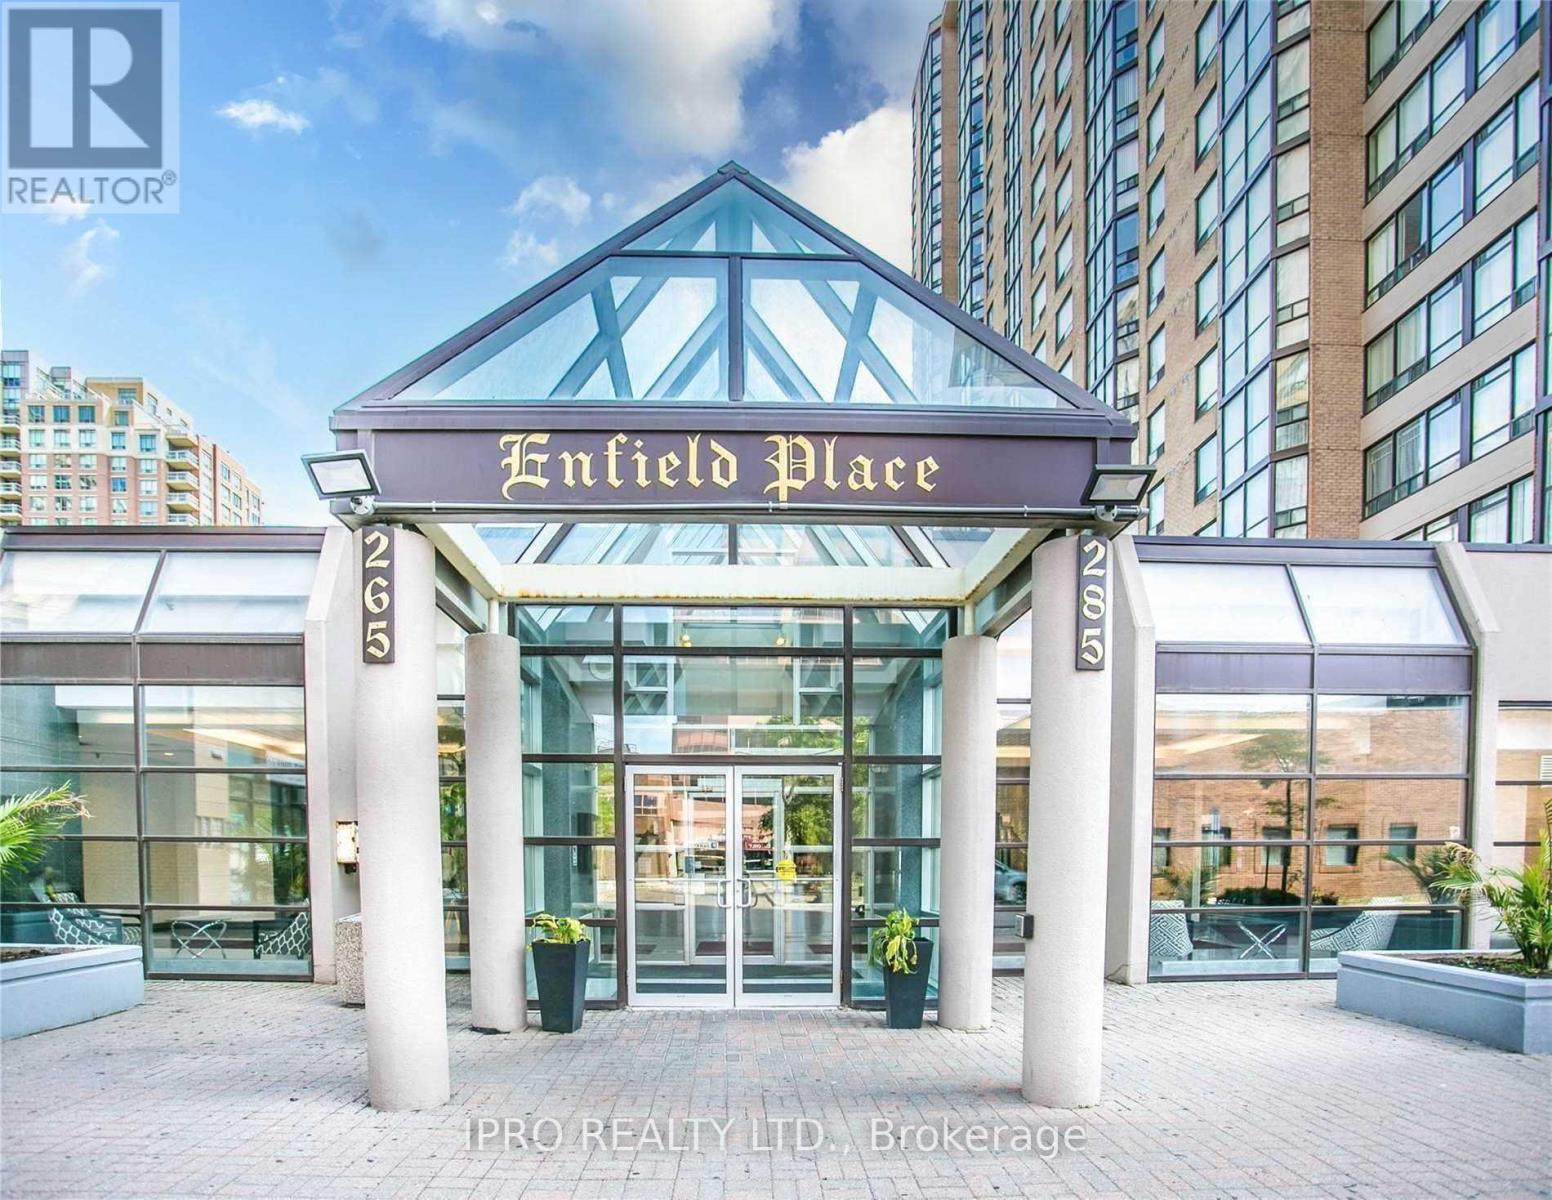 1711 - 265 ENFIELD PLACE PLACE, mississauga, Ontario